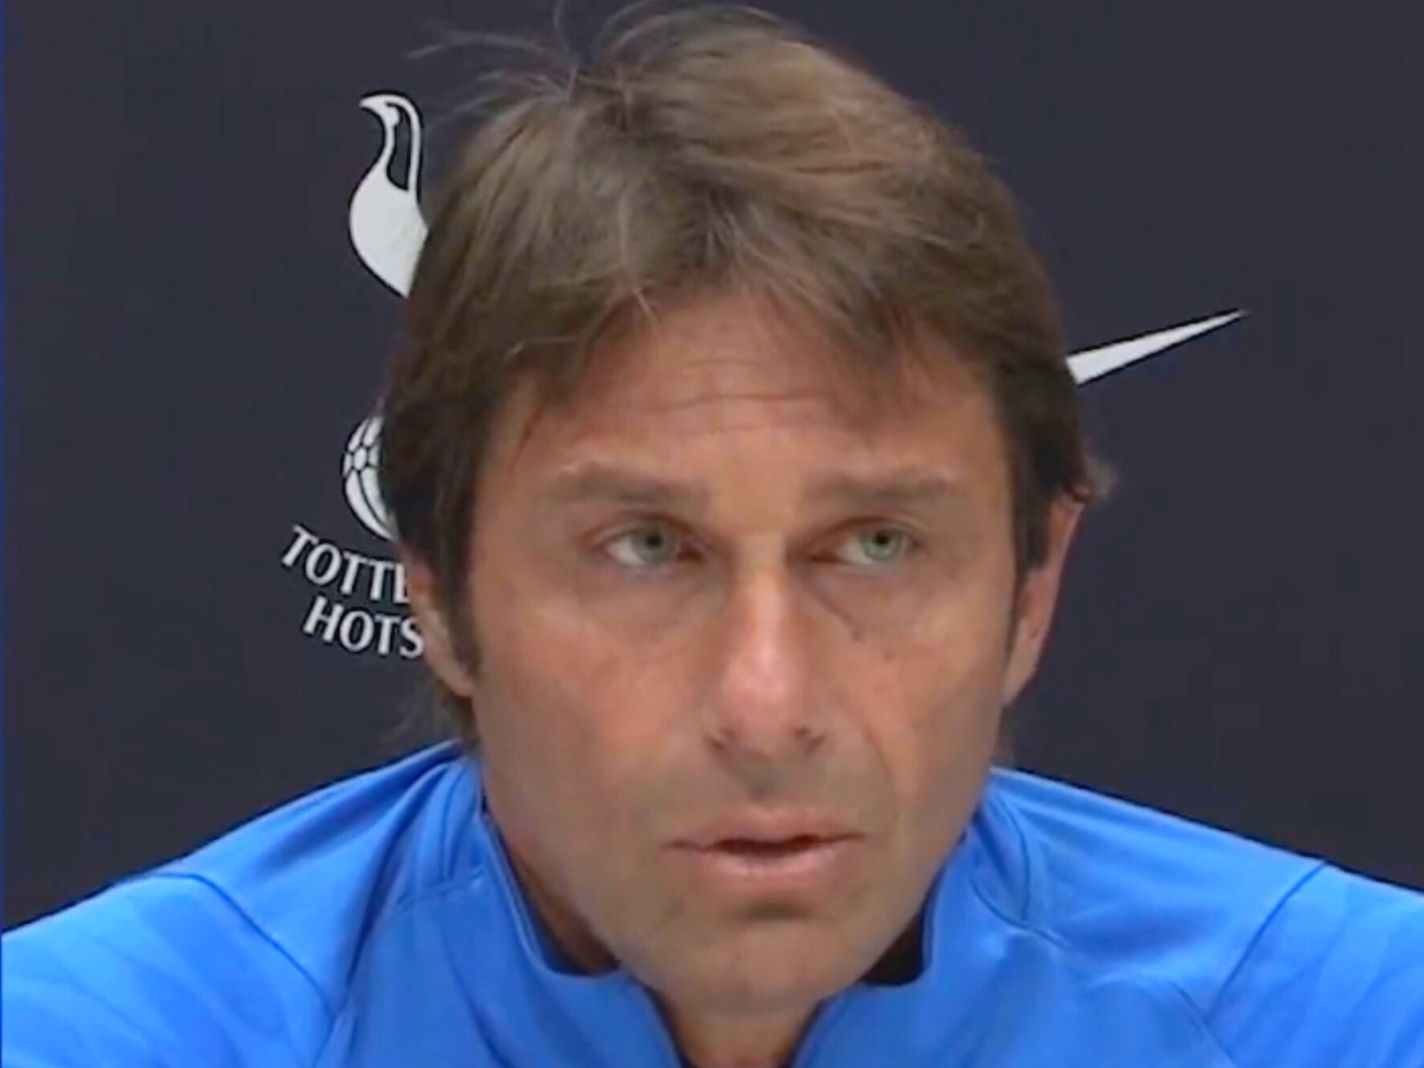 Revealed: The kooky nicknames Antonio Conte has adopted for his Tottenham players